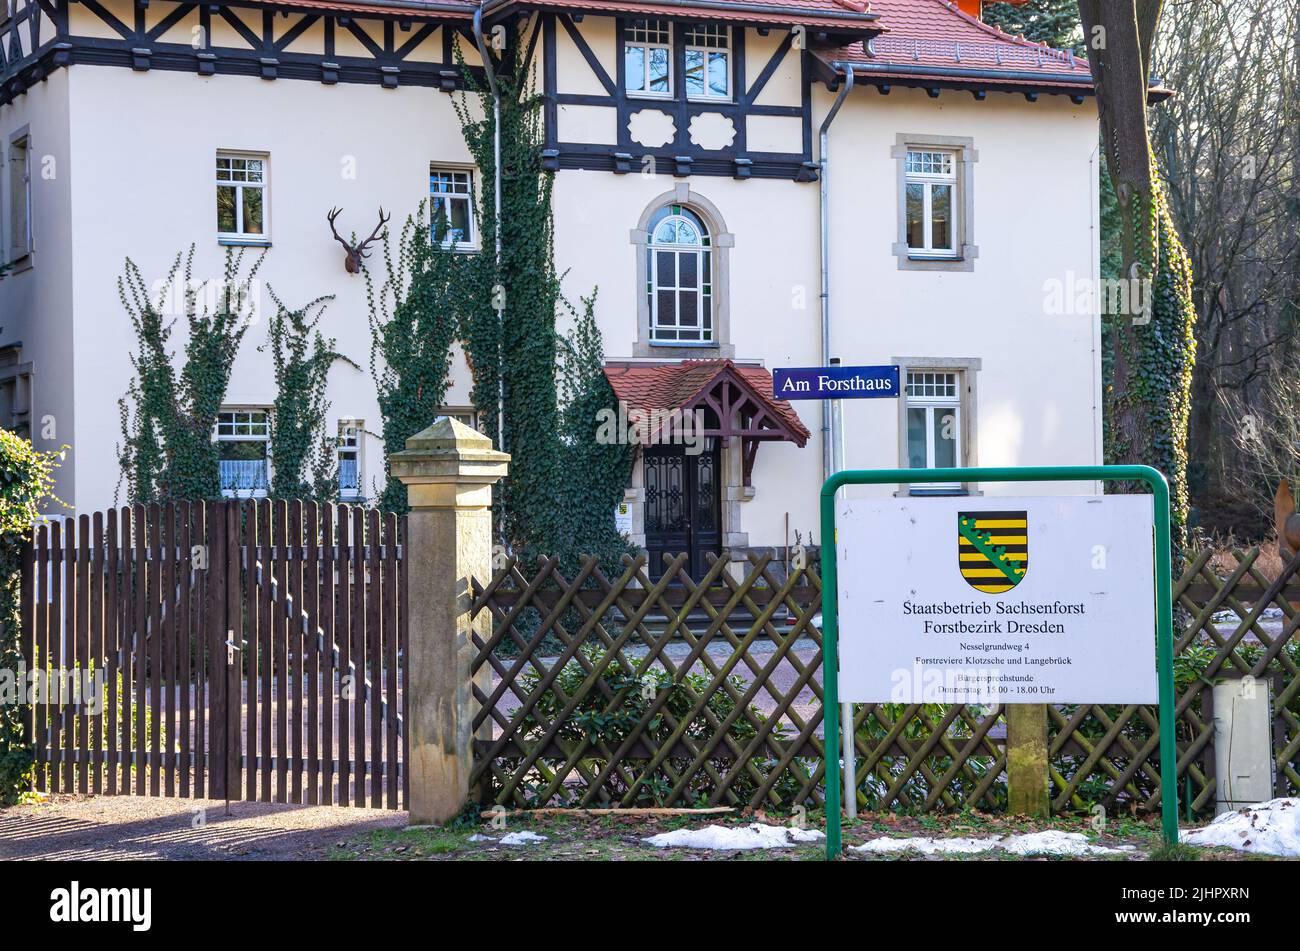 Dresden, Saxony, Germany: The forester's lodge in Klotzsche, seat of the Sachsenforst state enterprise, forestry district of Dresden. Stock Photo